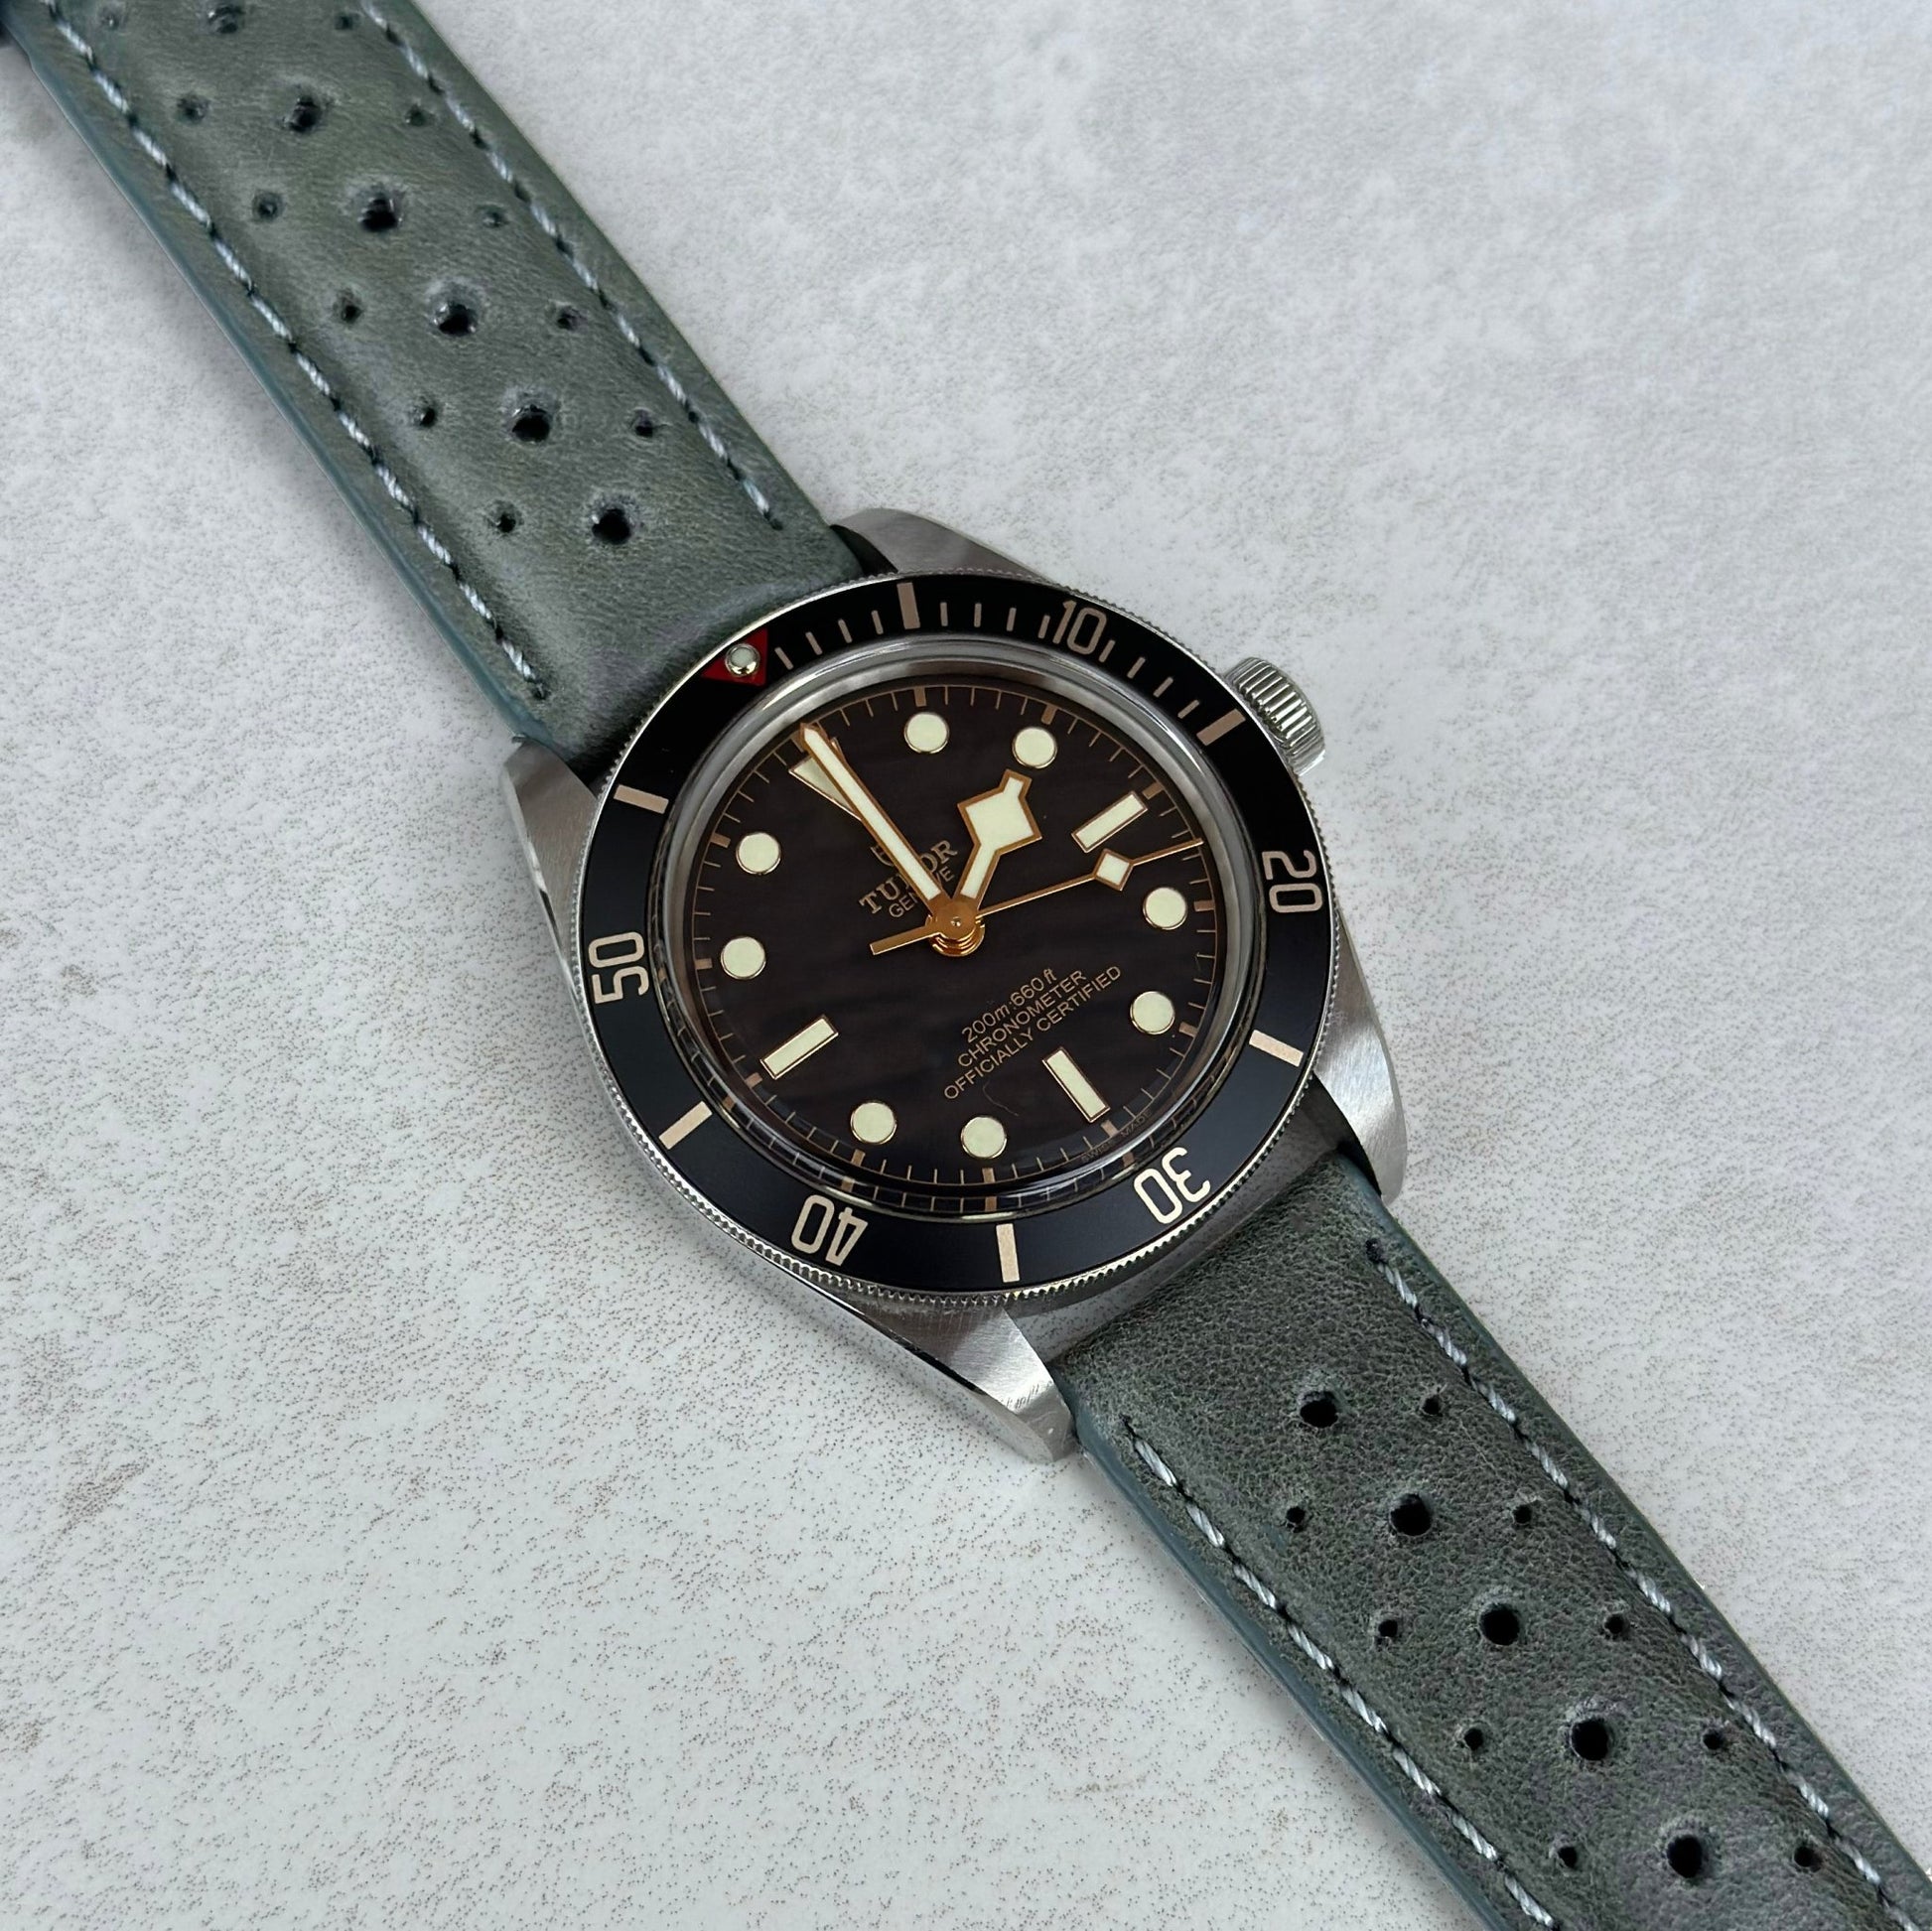 Montecarlo grey full grain leather watch strap on the Tudor Blackbay 58. Perforated leather. Watch And Strap